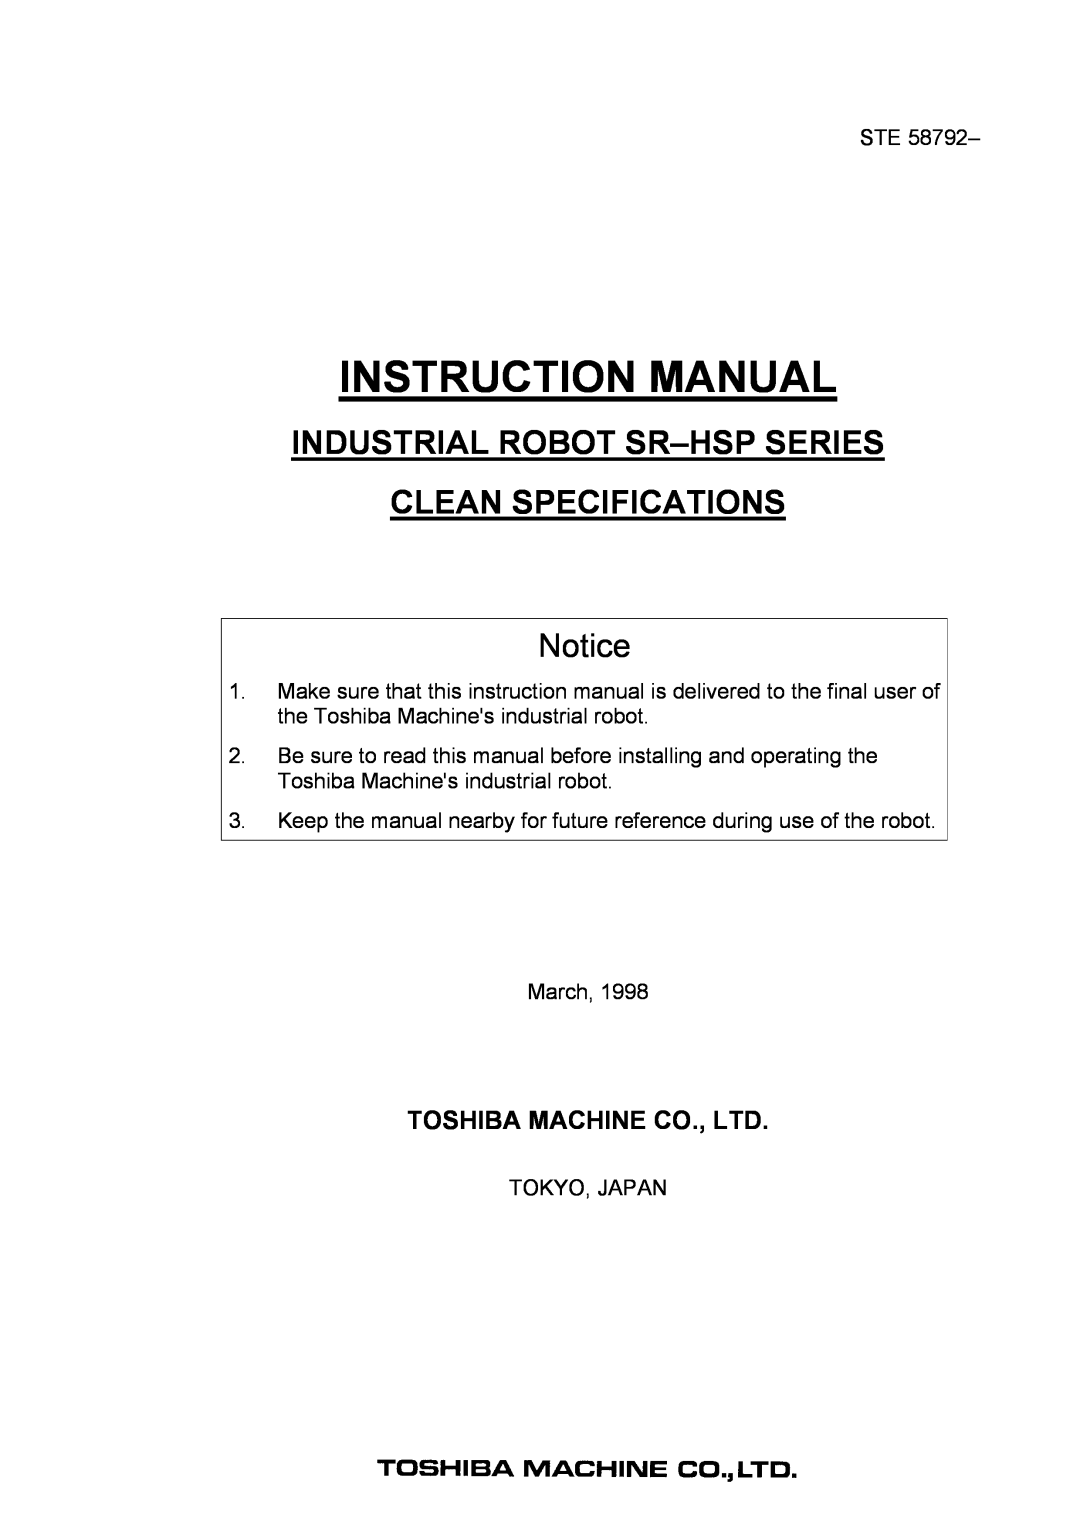 Toshiba SR1054HSPCR instruction manual Industrial Robot Sr-Hspseries, Clean Specifications 